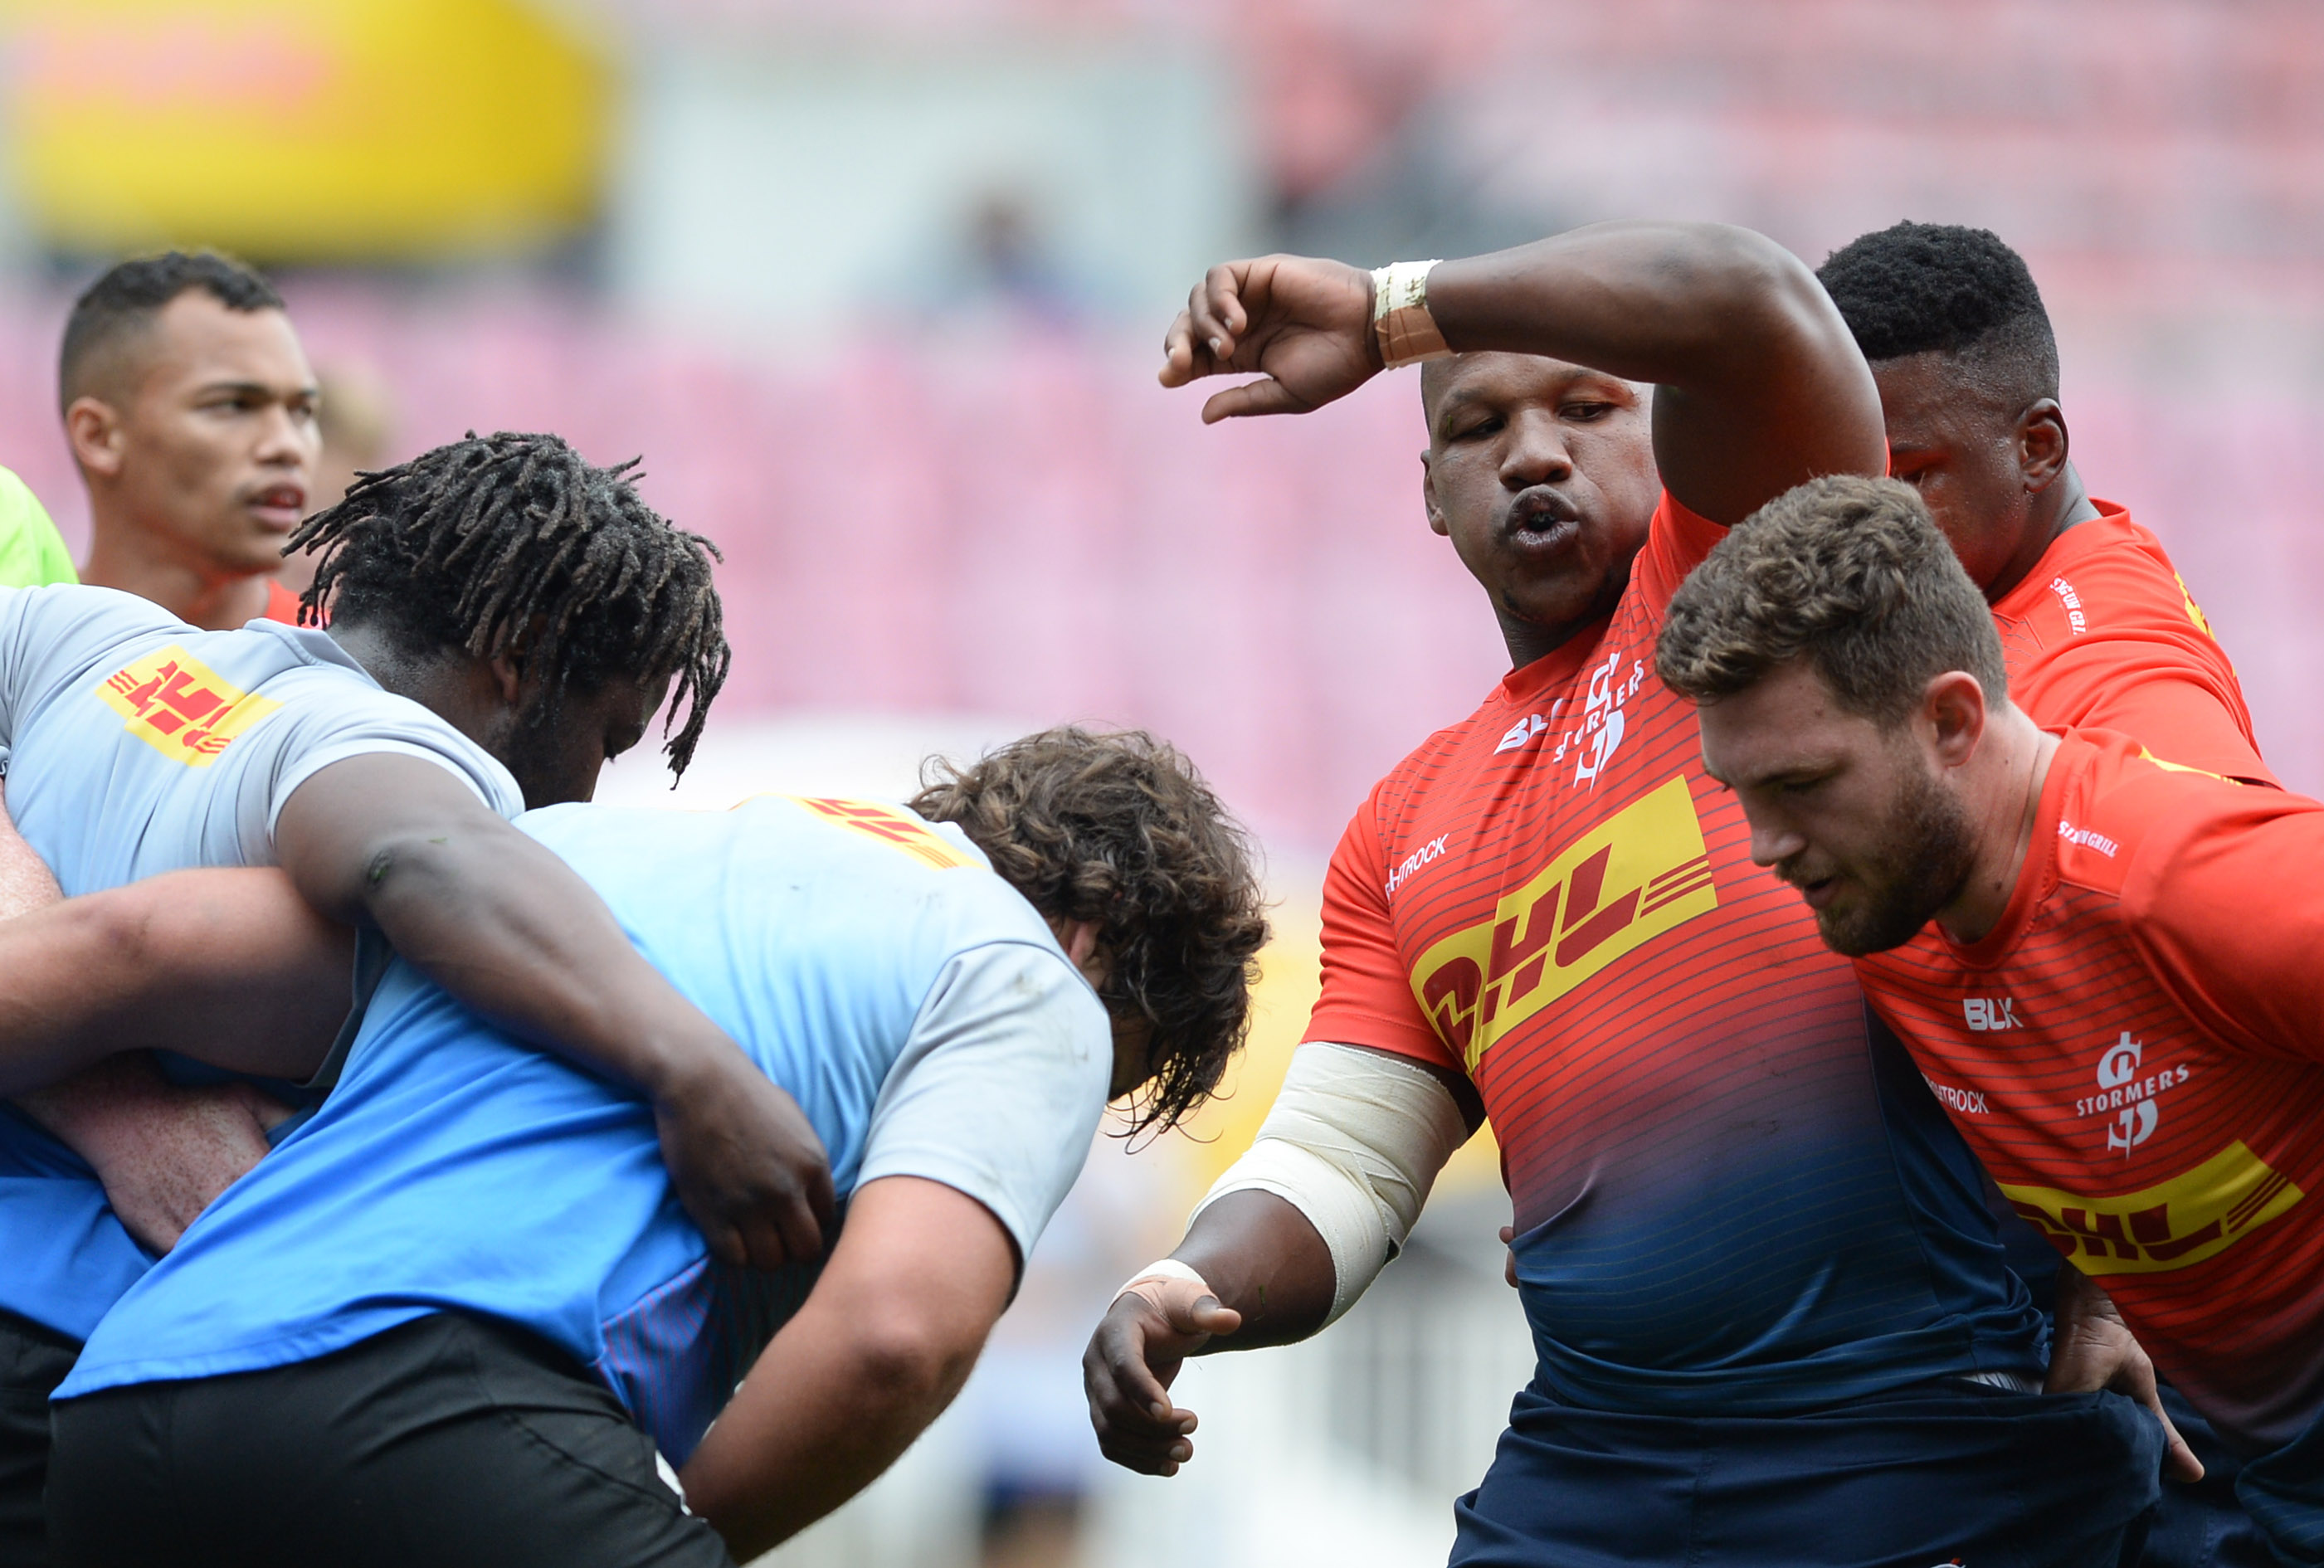 Bongi Mbonambi of the Dassies hooks in before a scrum during the Stormers friendly game between the Devils Peak Dassies (red) and the Boulders Beach Penguins (blue) at Newlands Rugby Stadium in Cape Town on 18 September 2020 © Ryan Willkisky/BackpagePix